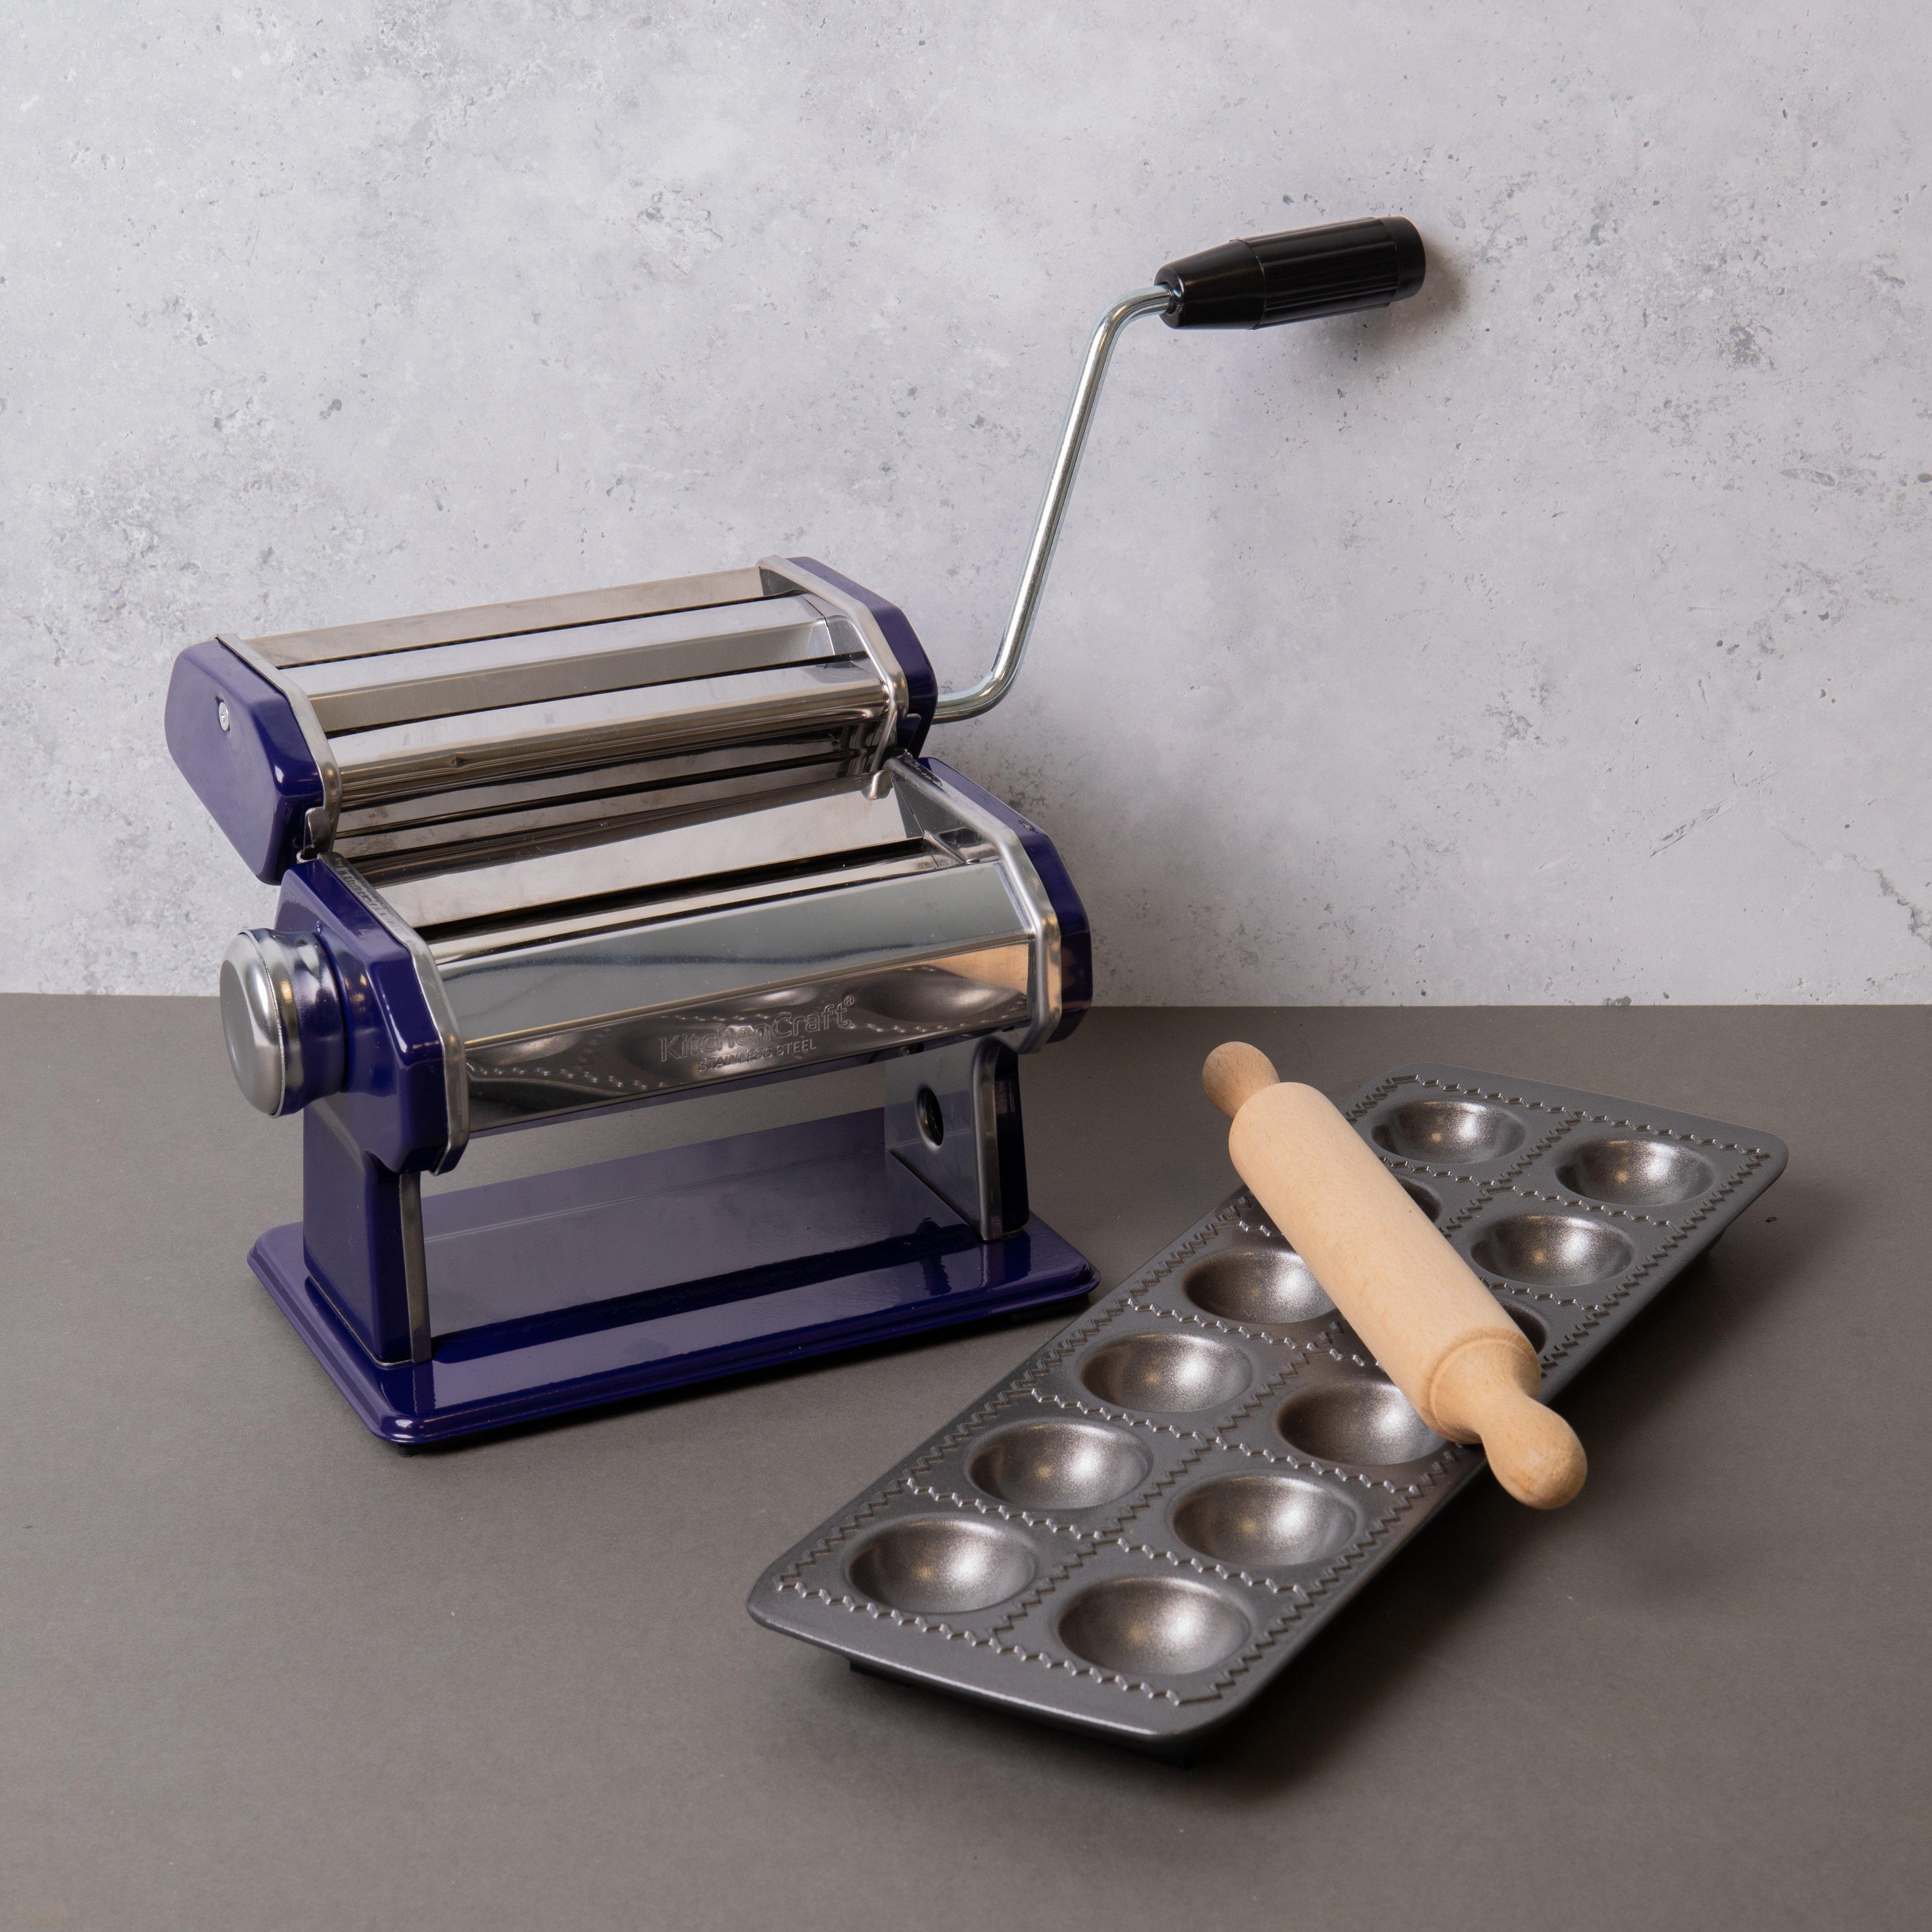 Pasta Making Set with Blue Stainless Steel Pasta Maker, Non-Stick Ravioli Mould and Rolling Pin